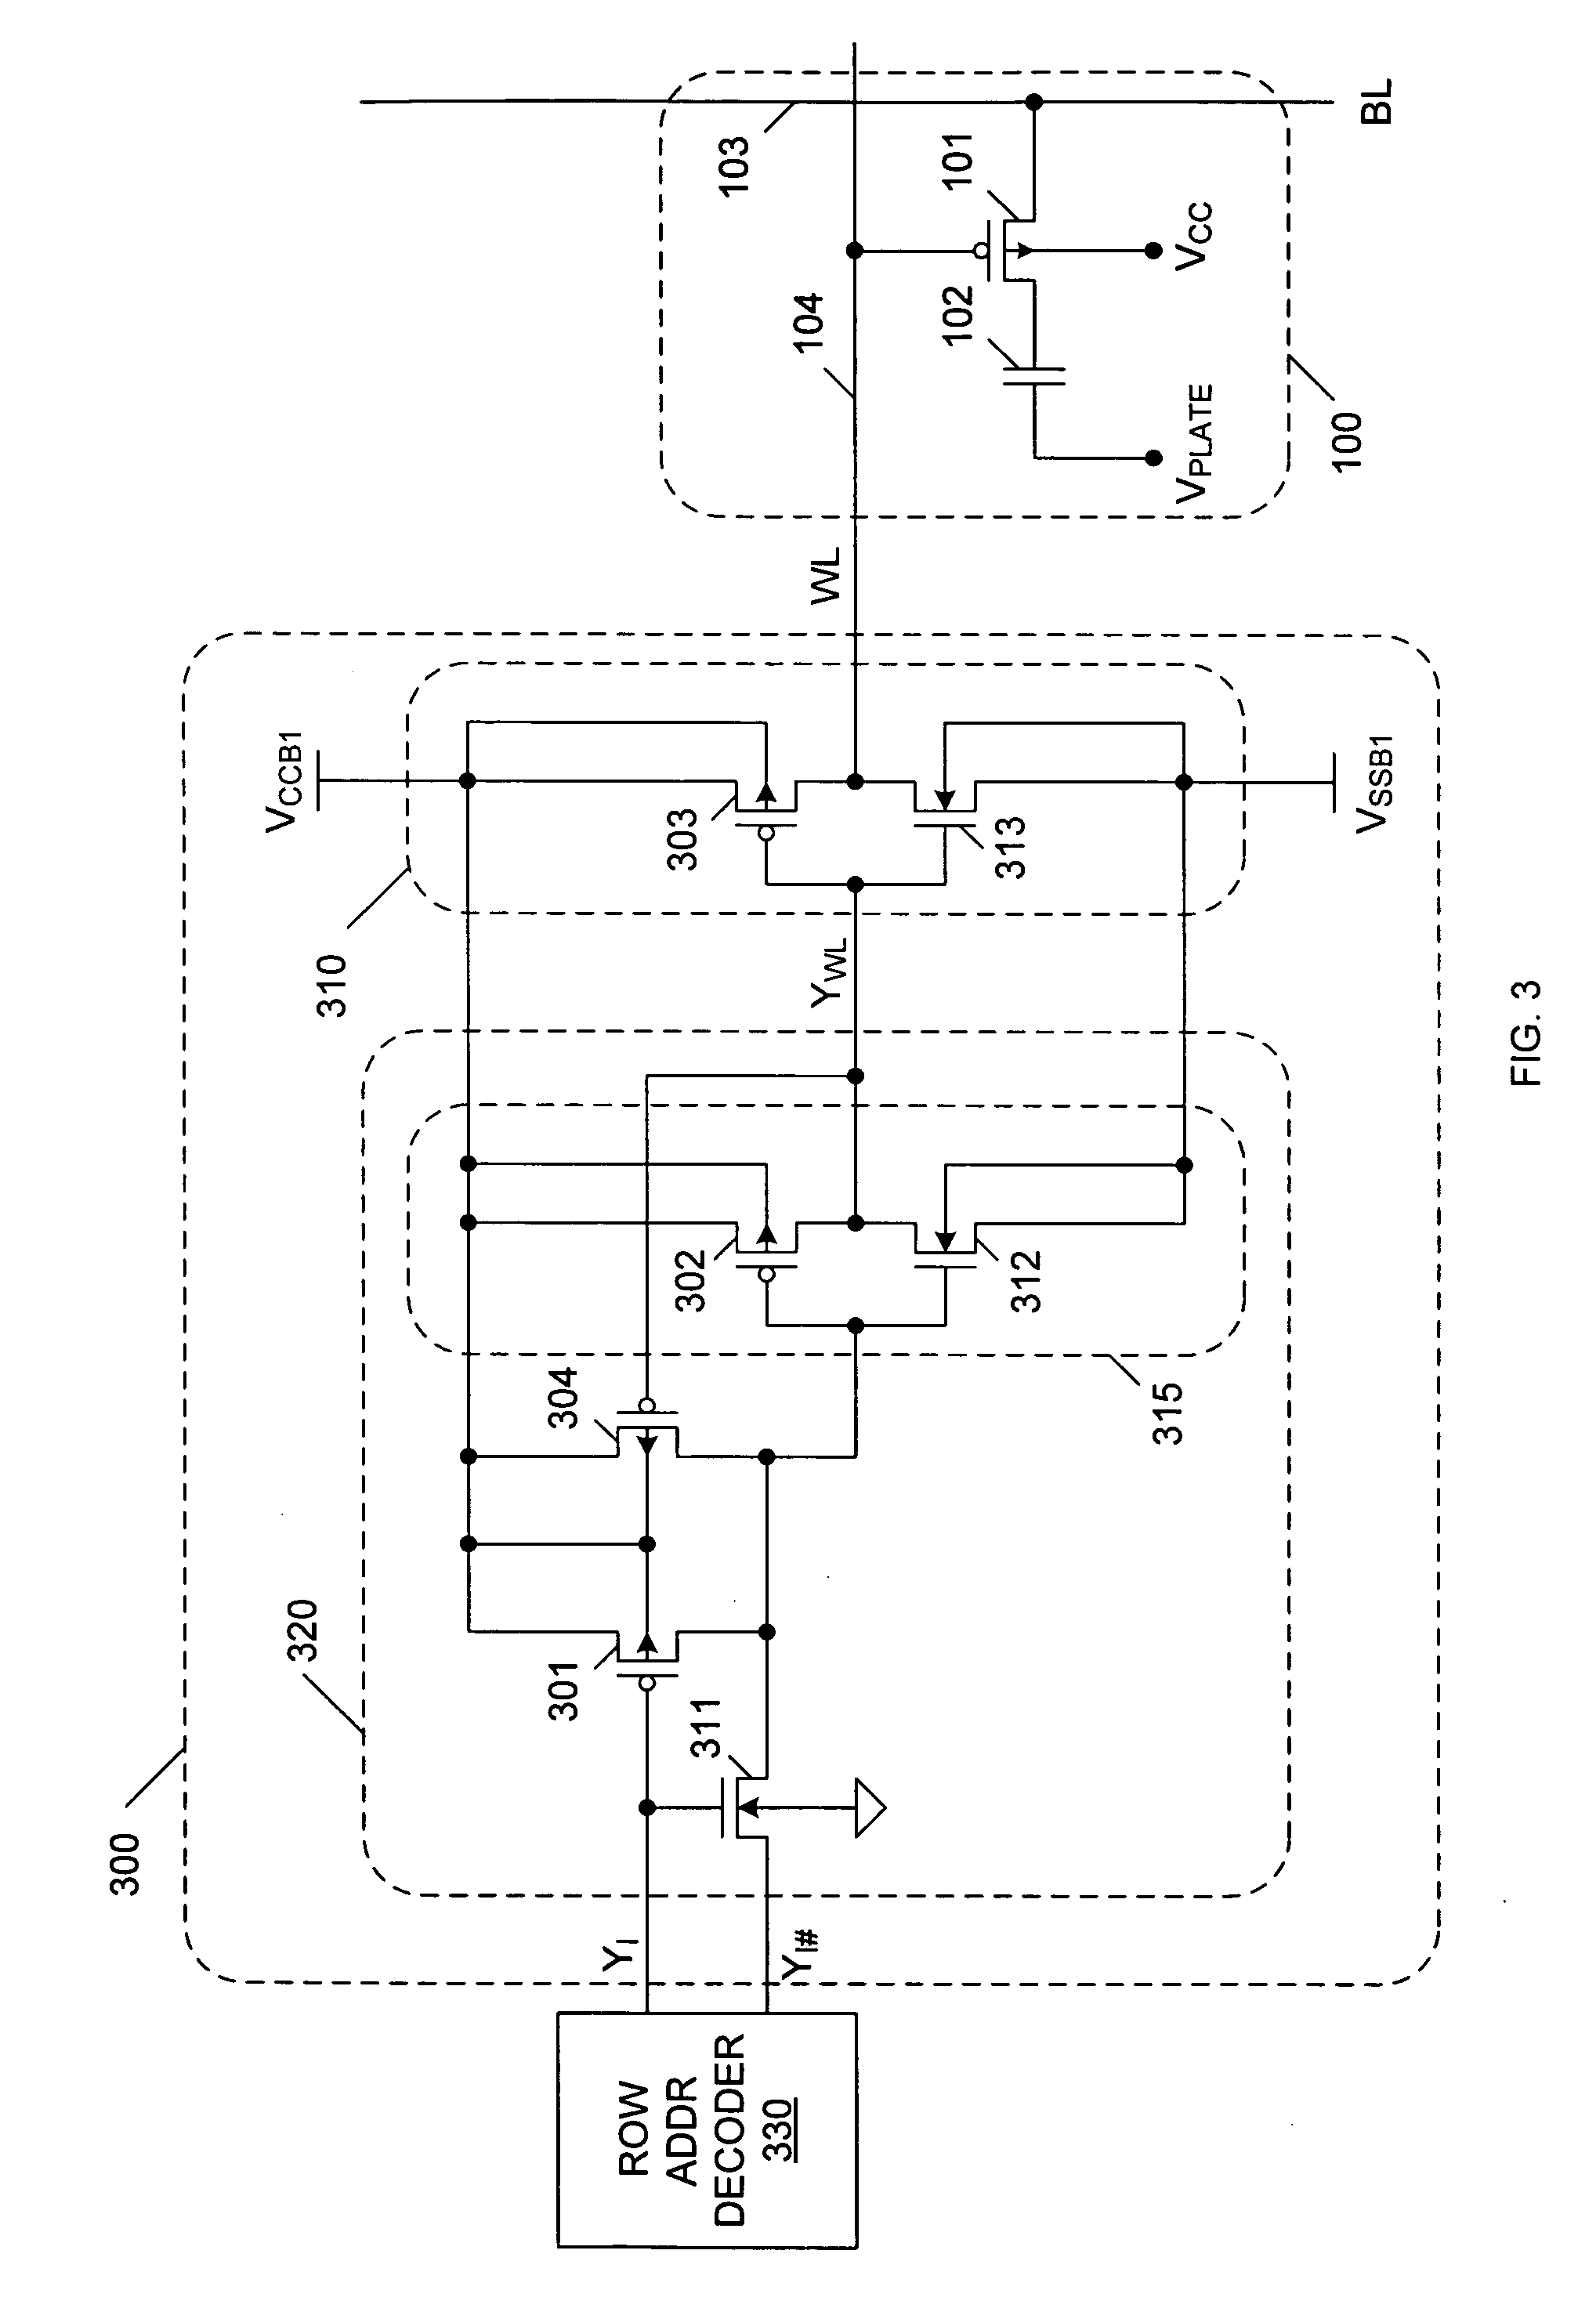 Word line driver for DRAM embedded in a logic process